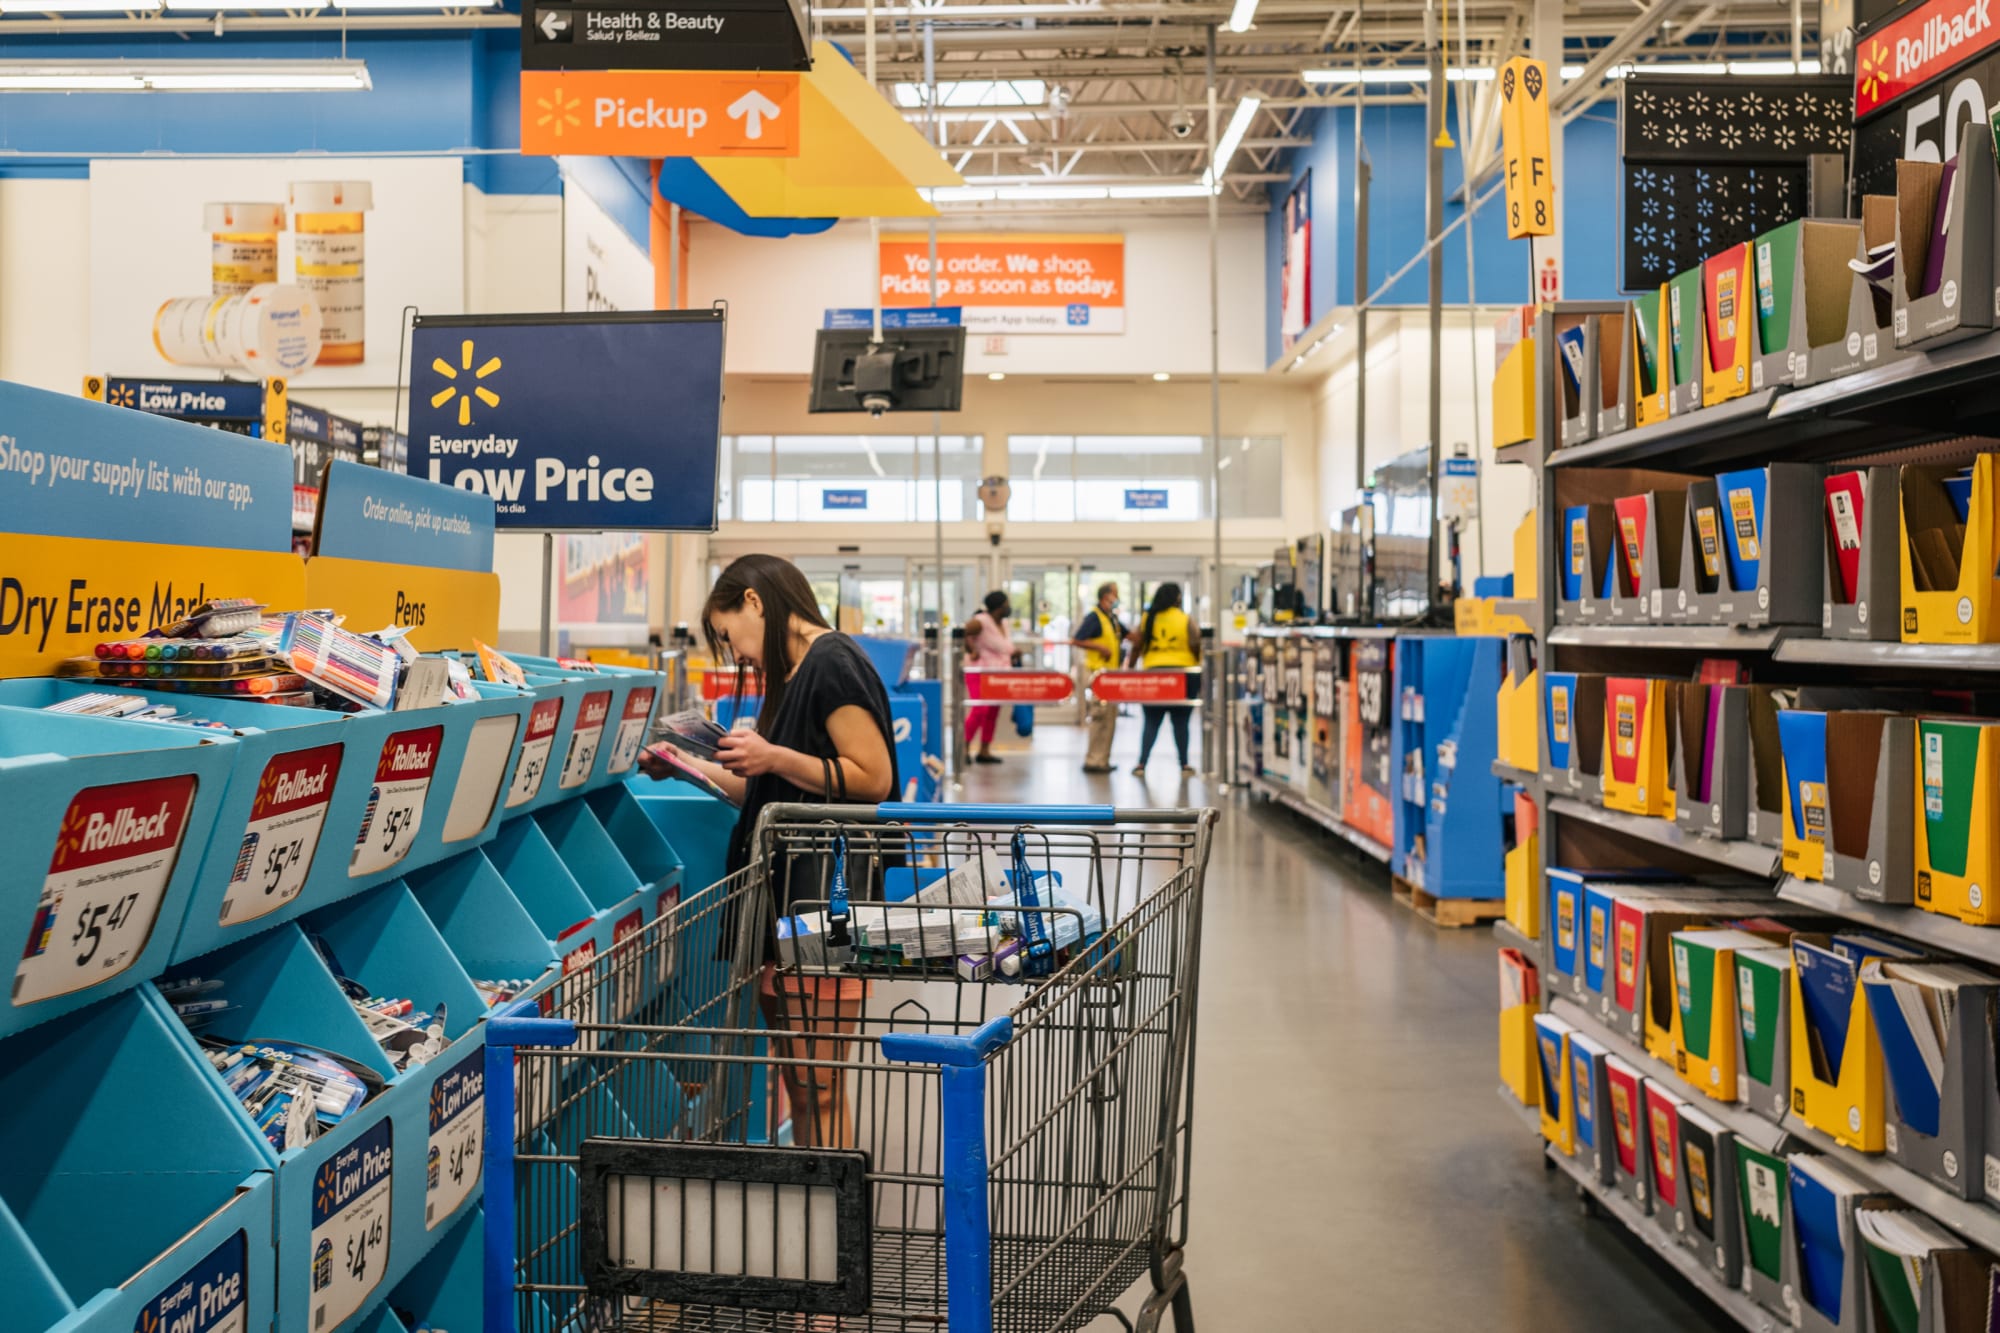 Walmart Labor Day Hours: Is Walmart open on Labor Day?